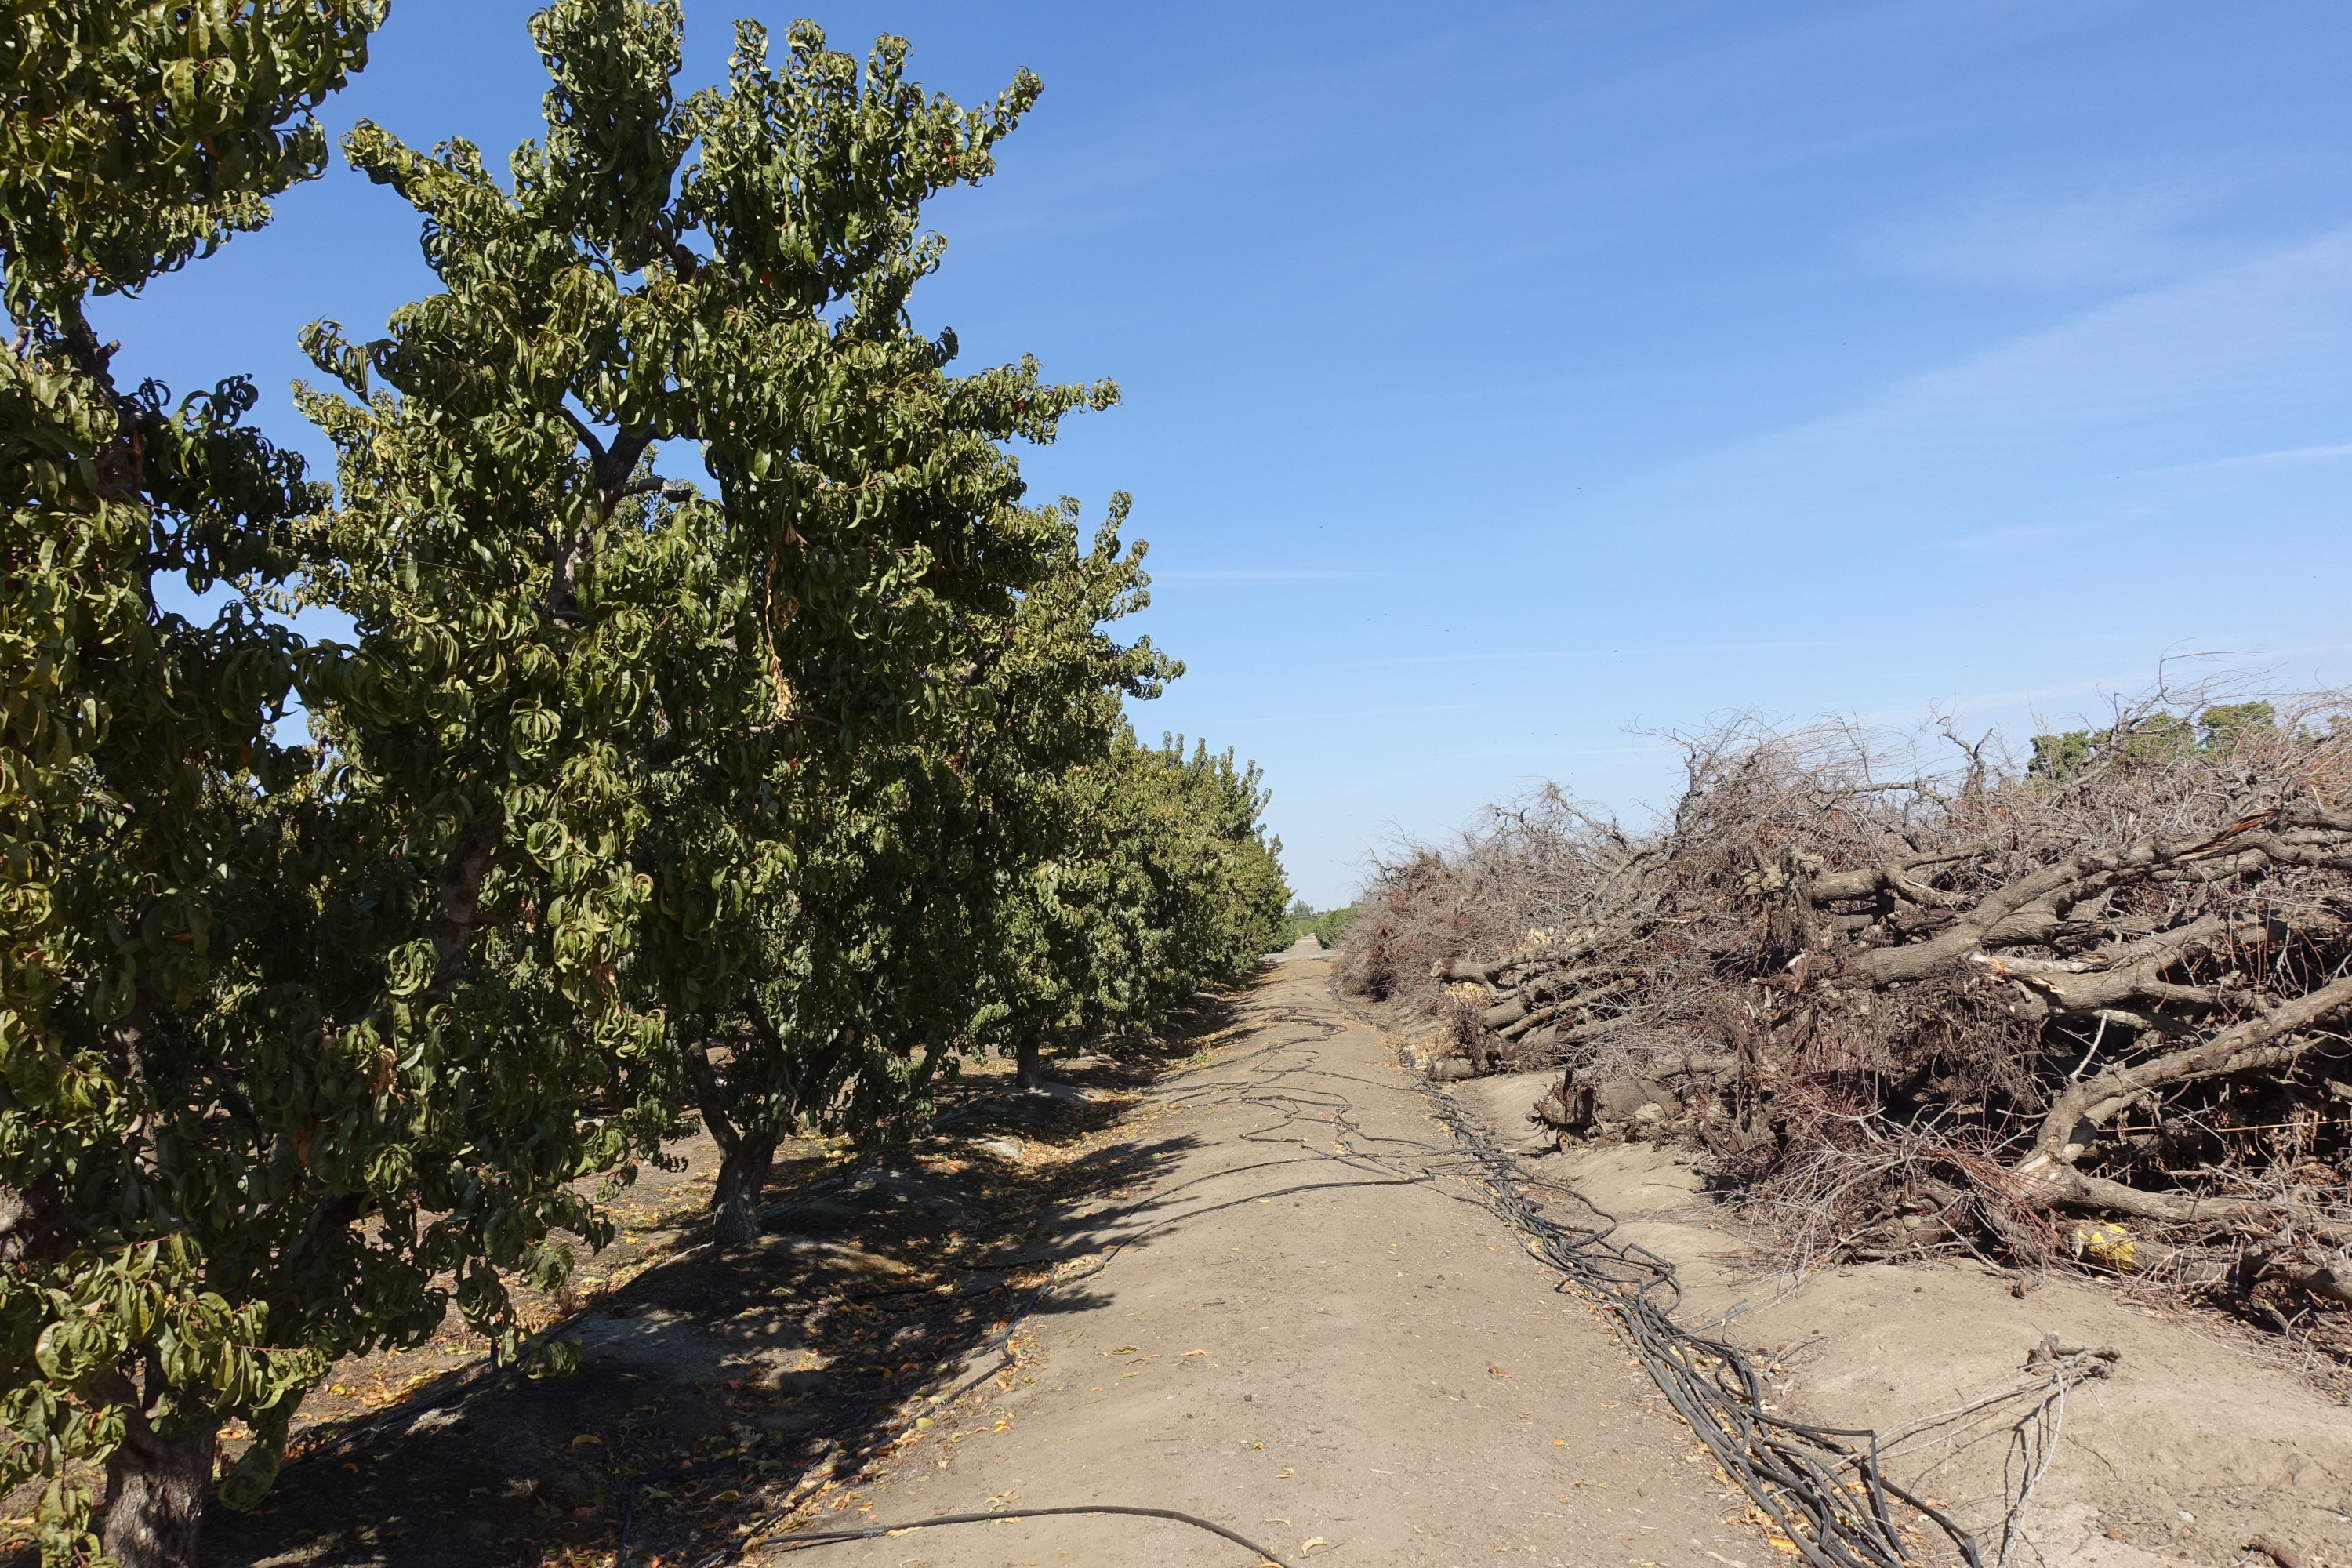 Standing orchard trees (left) next to uprooted orchard trees (right)